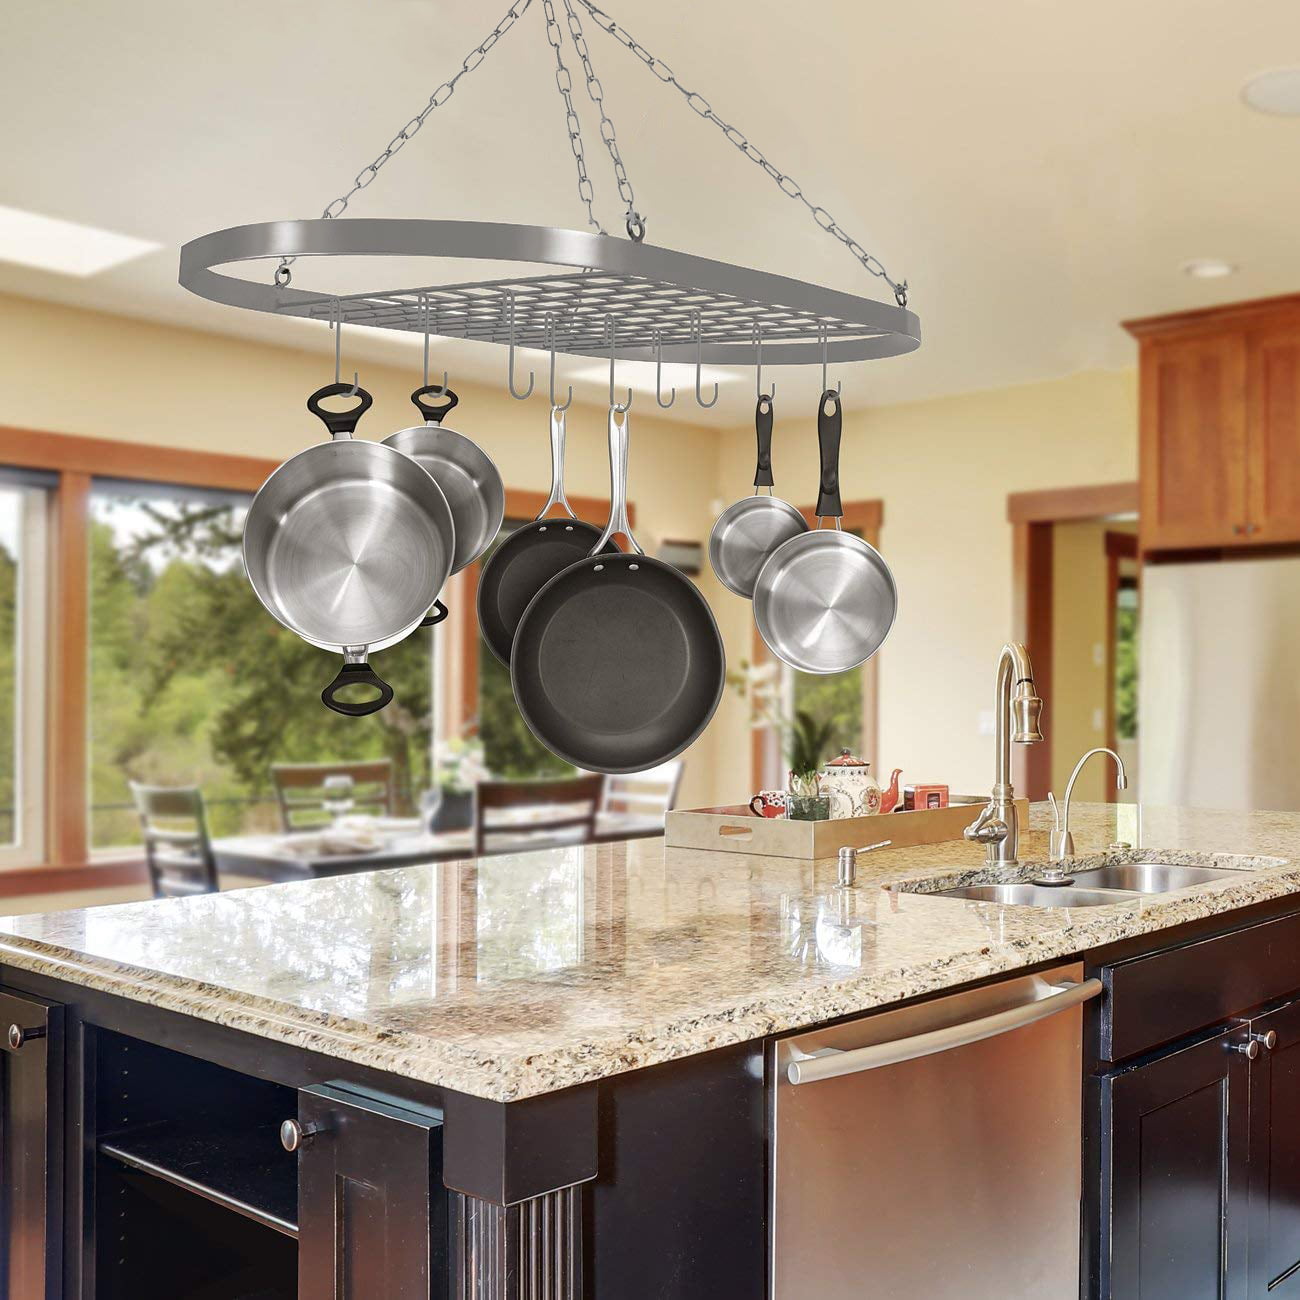 Hanging Pot Racks Oval Stainless Steel, Round Ceiling Pot Rack